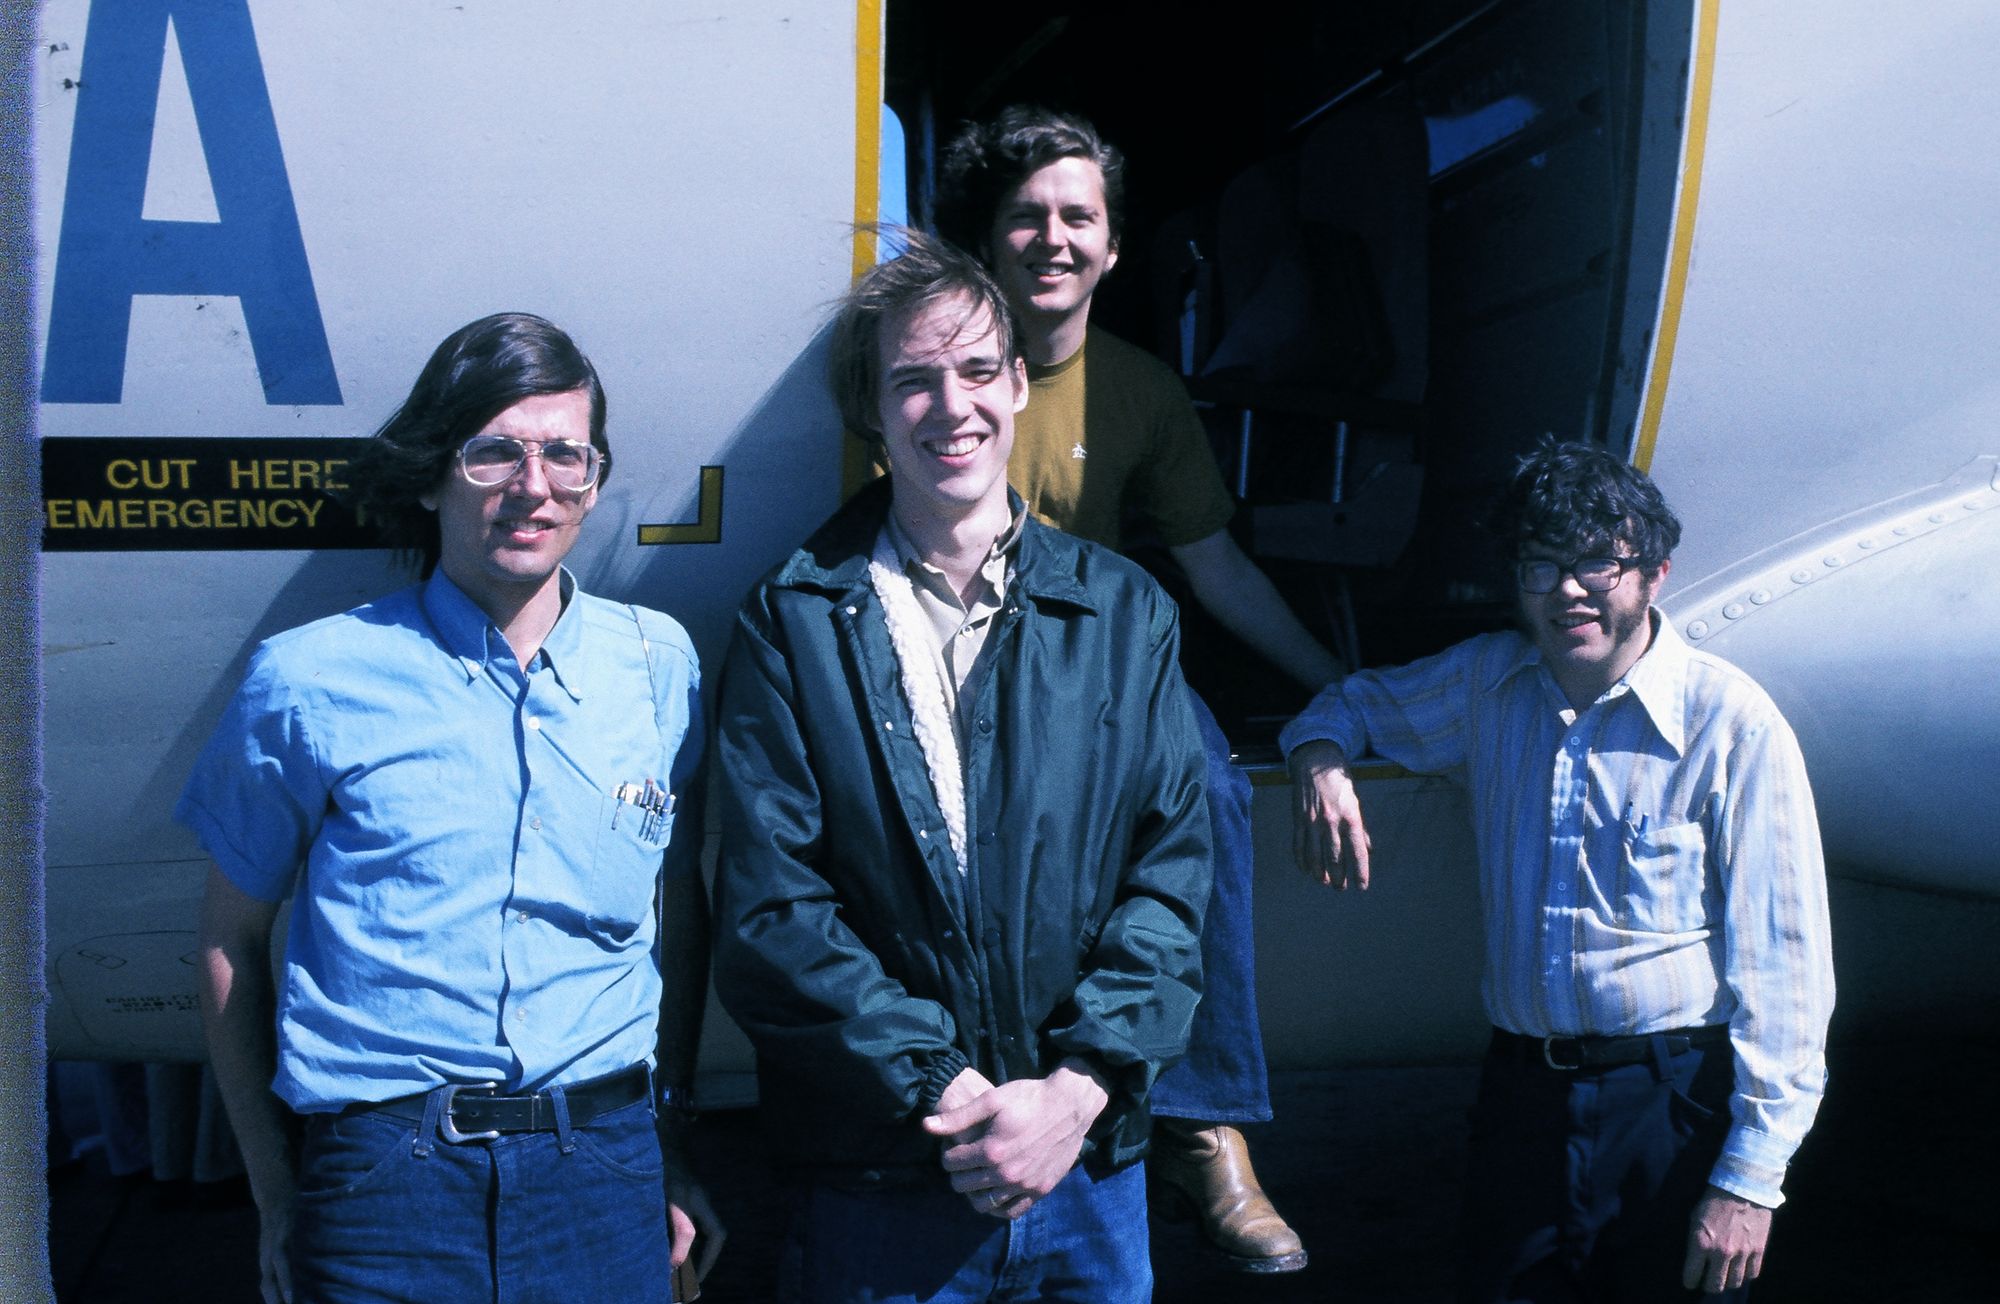 Four young astronomers smile for the camera in front of an airplane.